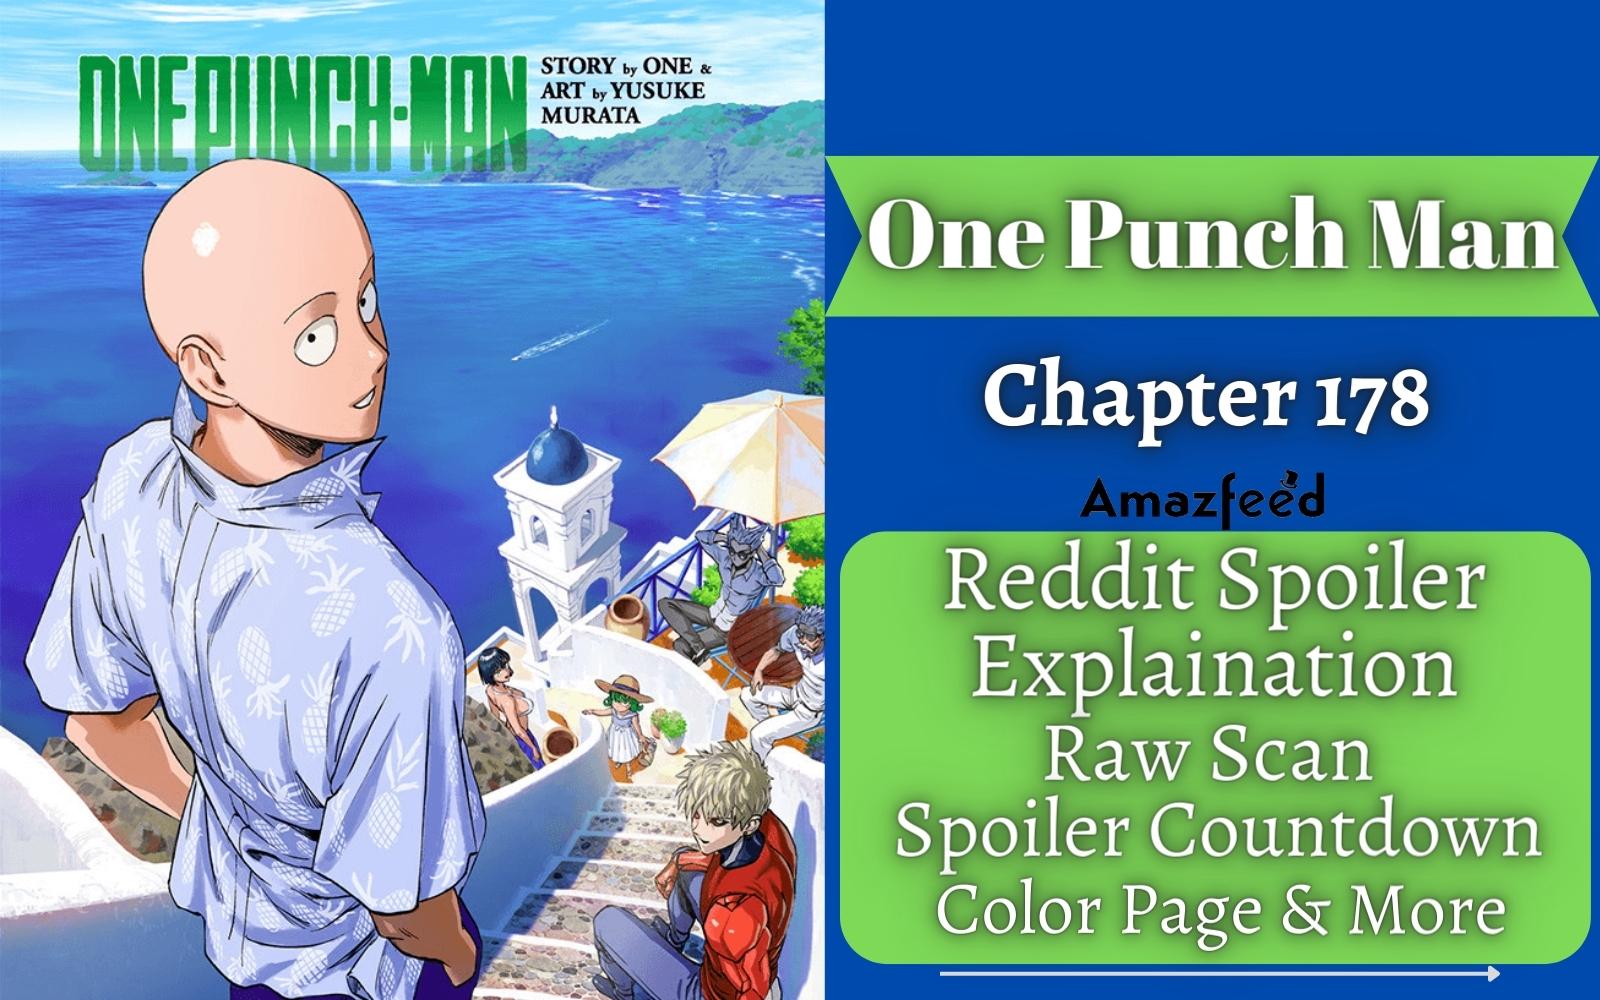 One Punch Man Chapter 178 Reddit Spoiler, Raw Scan Release Date, Shonen Jump Release Date, Color Page & More